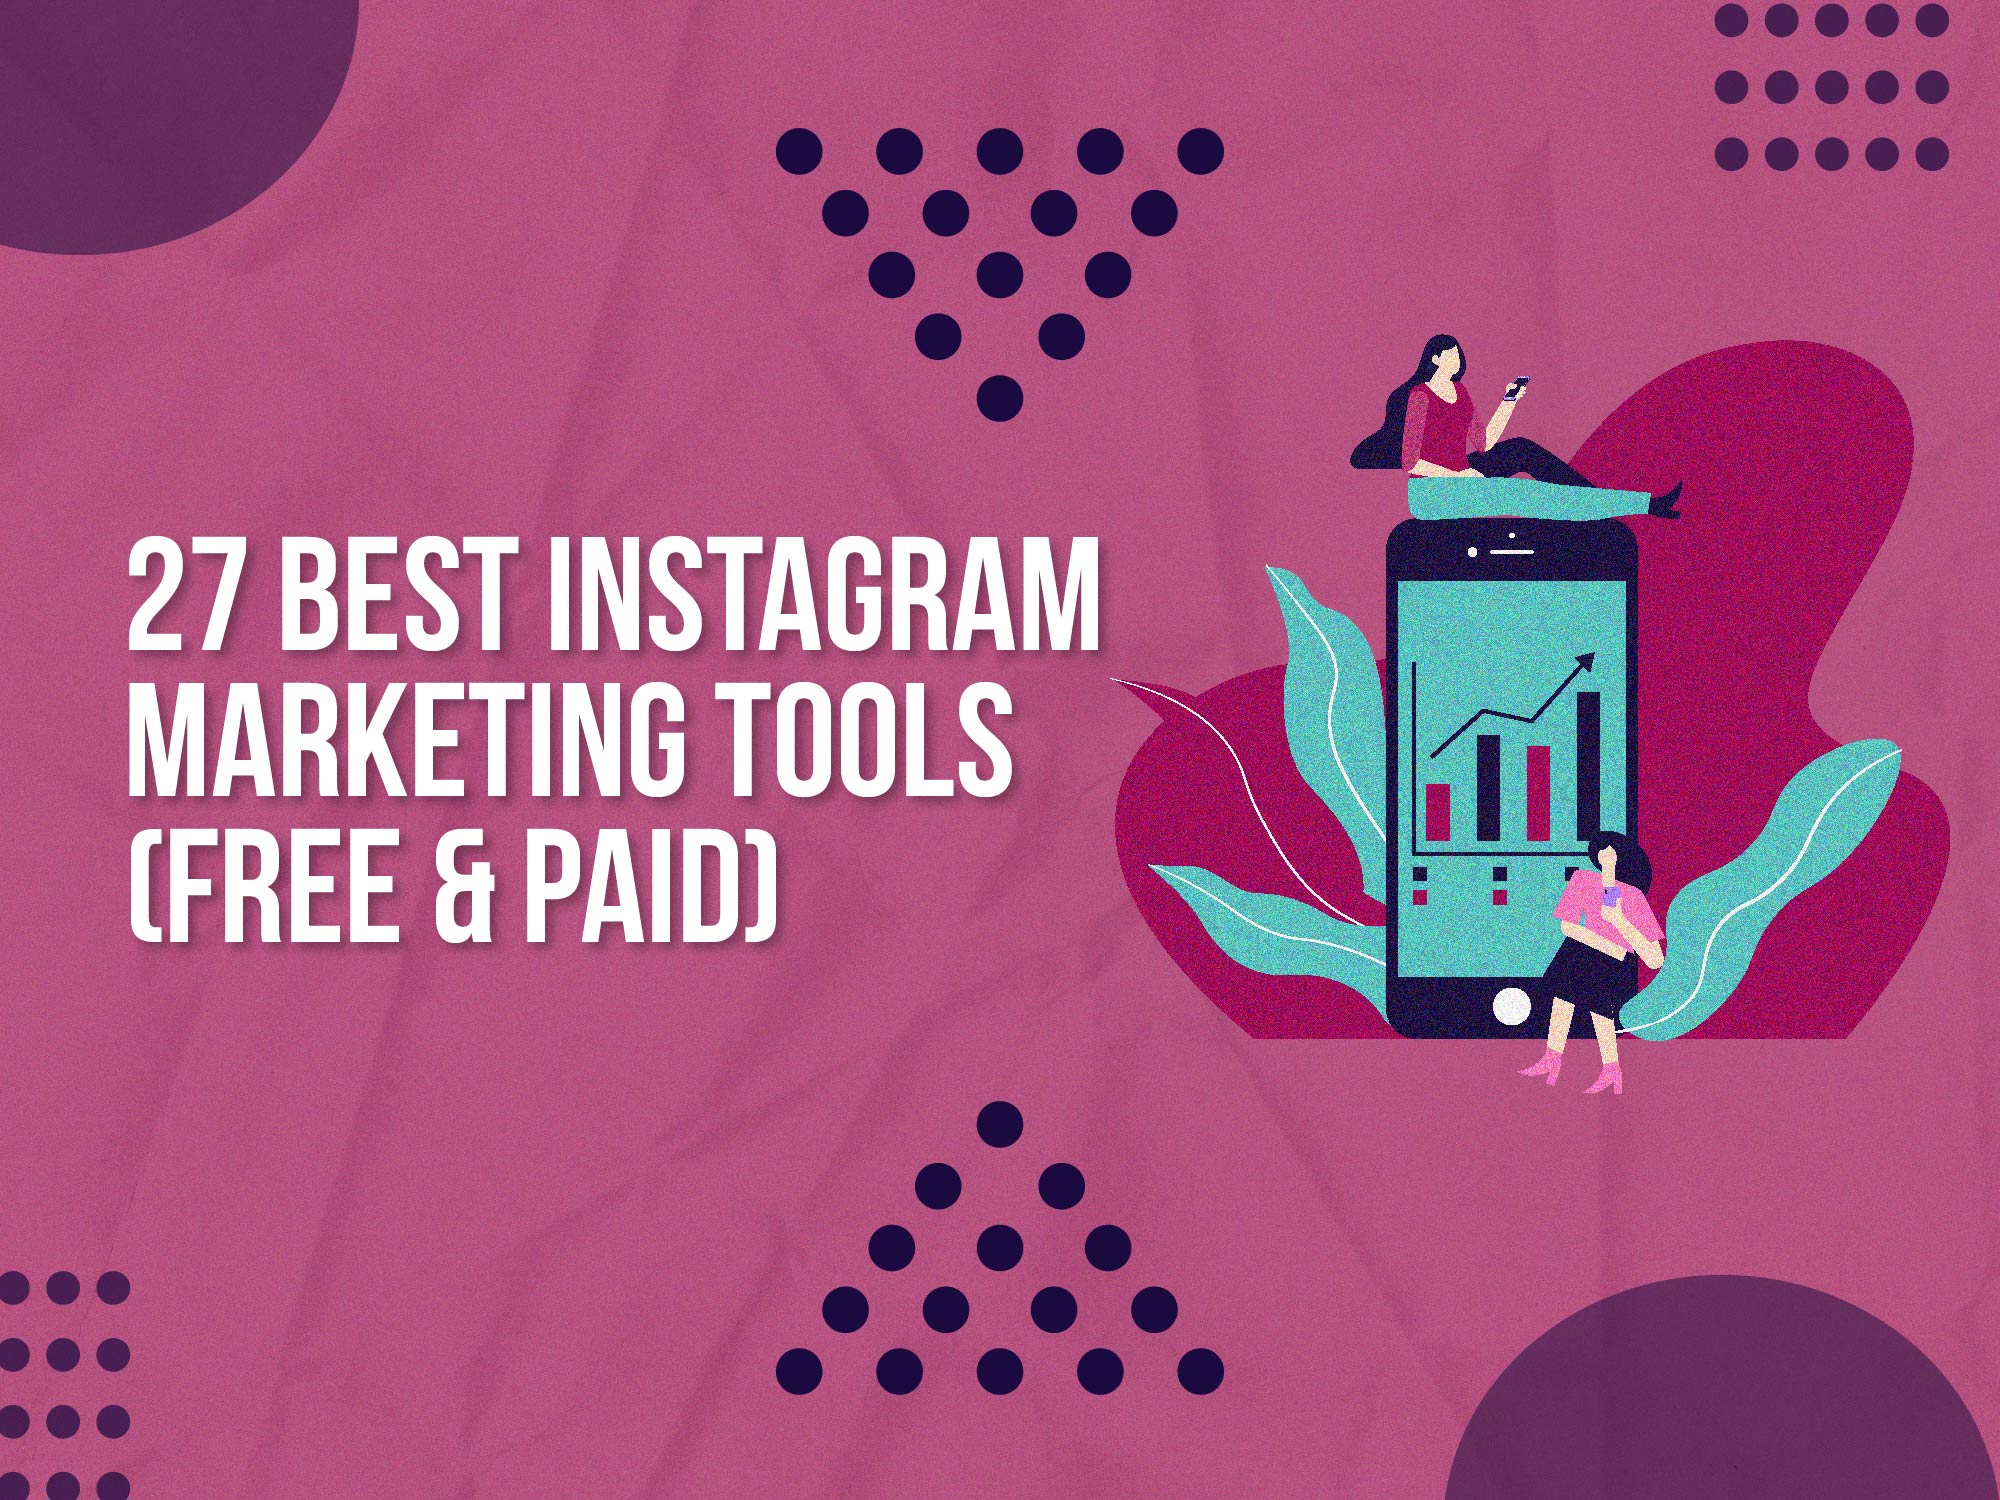 The 26 Best Instagram Marketing Tools (Free & Paid)